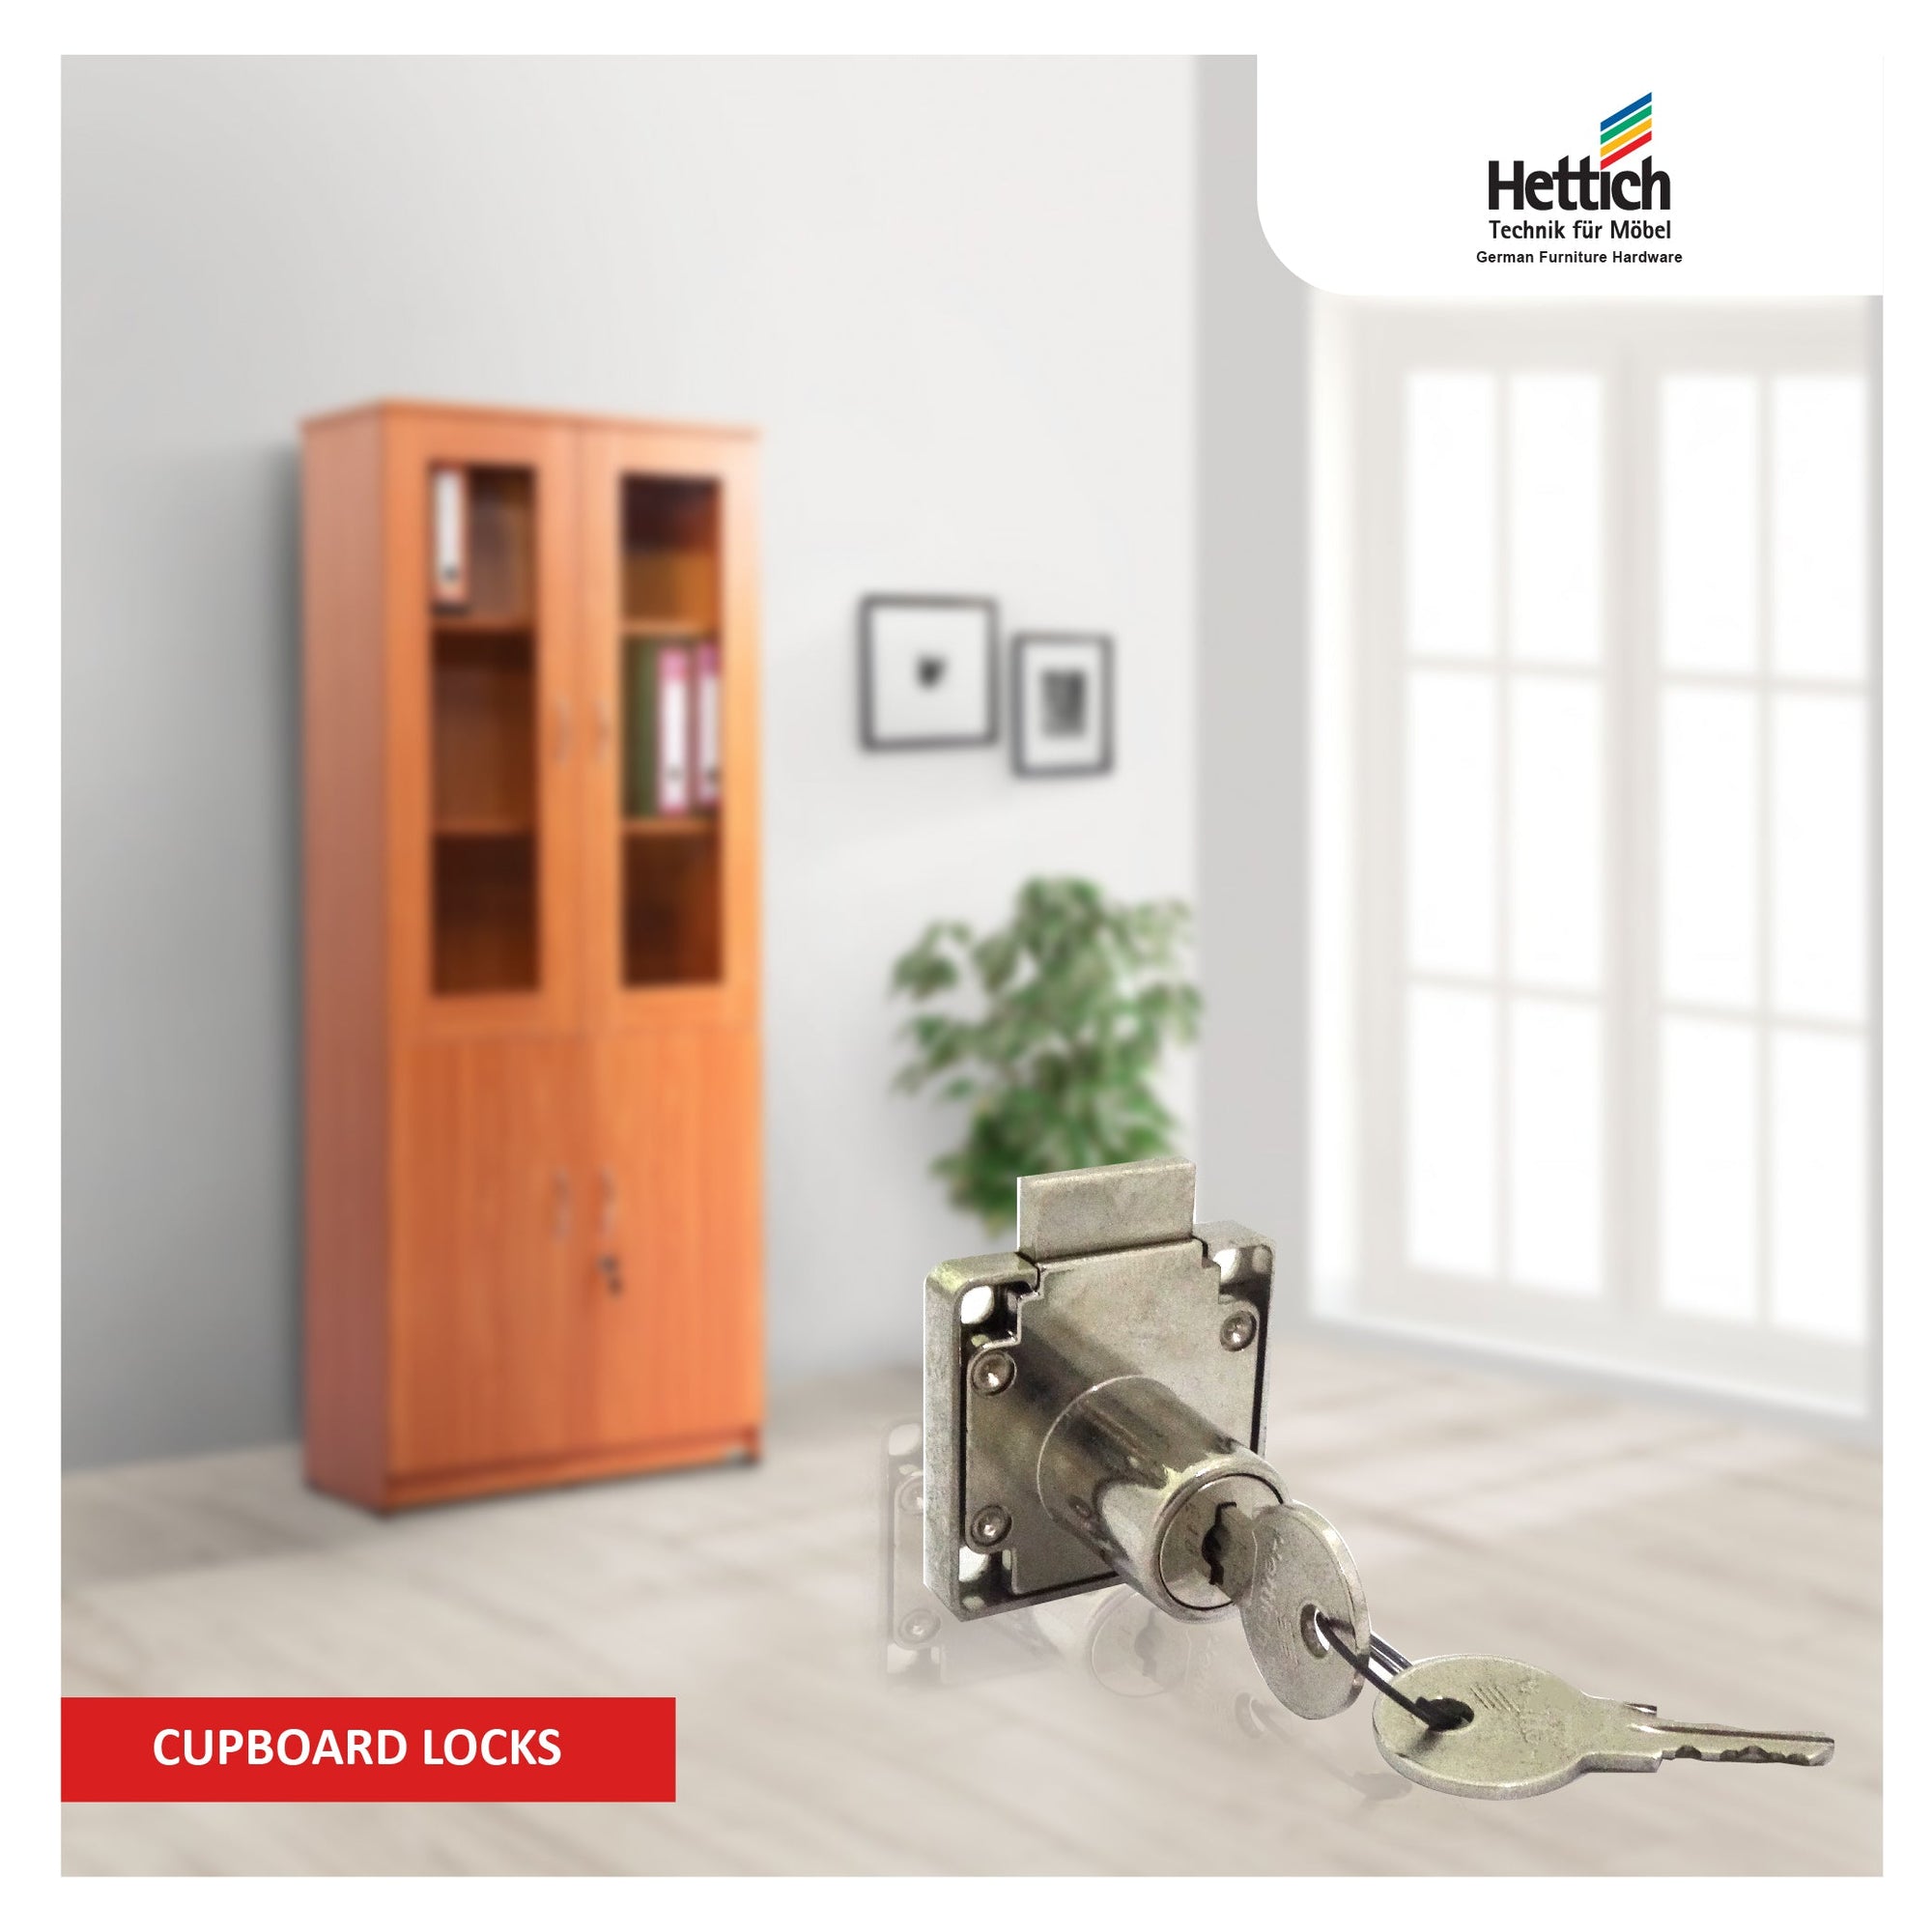 Hettich Cupboard Locks - Secure and Reliable Locking Solutions for Cabinets and Furniture